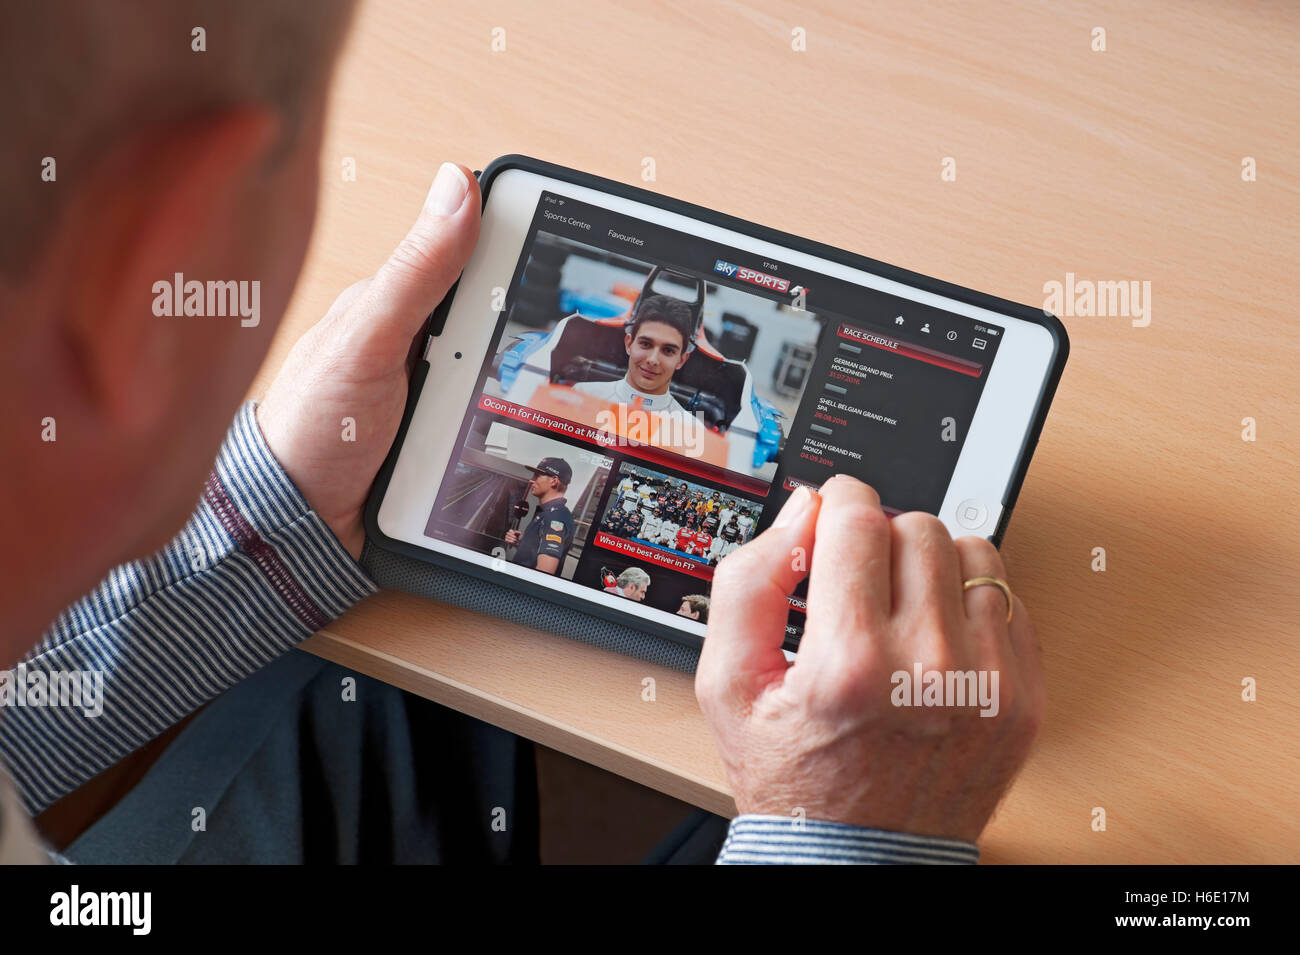 Close up of person man looking at watching Sky Sports app on ipad tablet screen England UK United Kingdom GB Great Britain Stock Photo